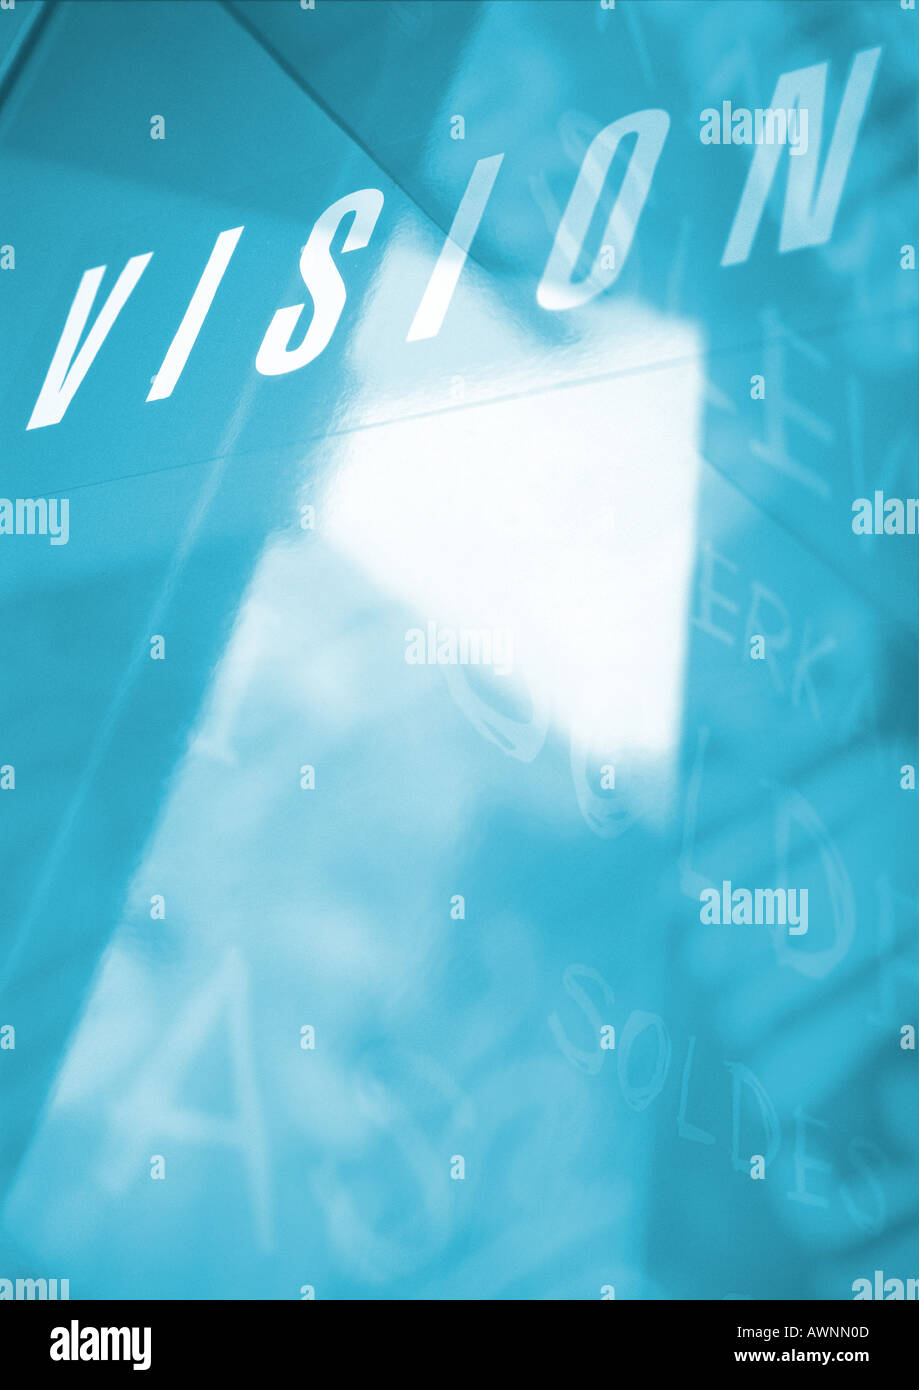 Vision typography in blues and white, montage Stock Photo